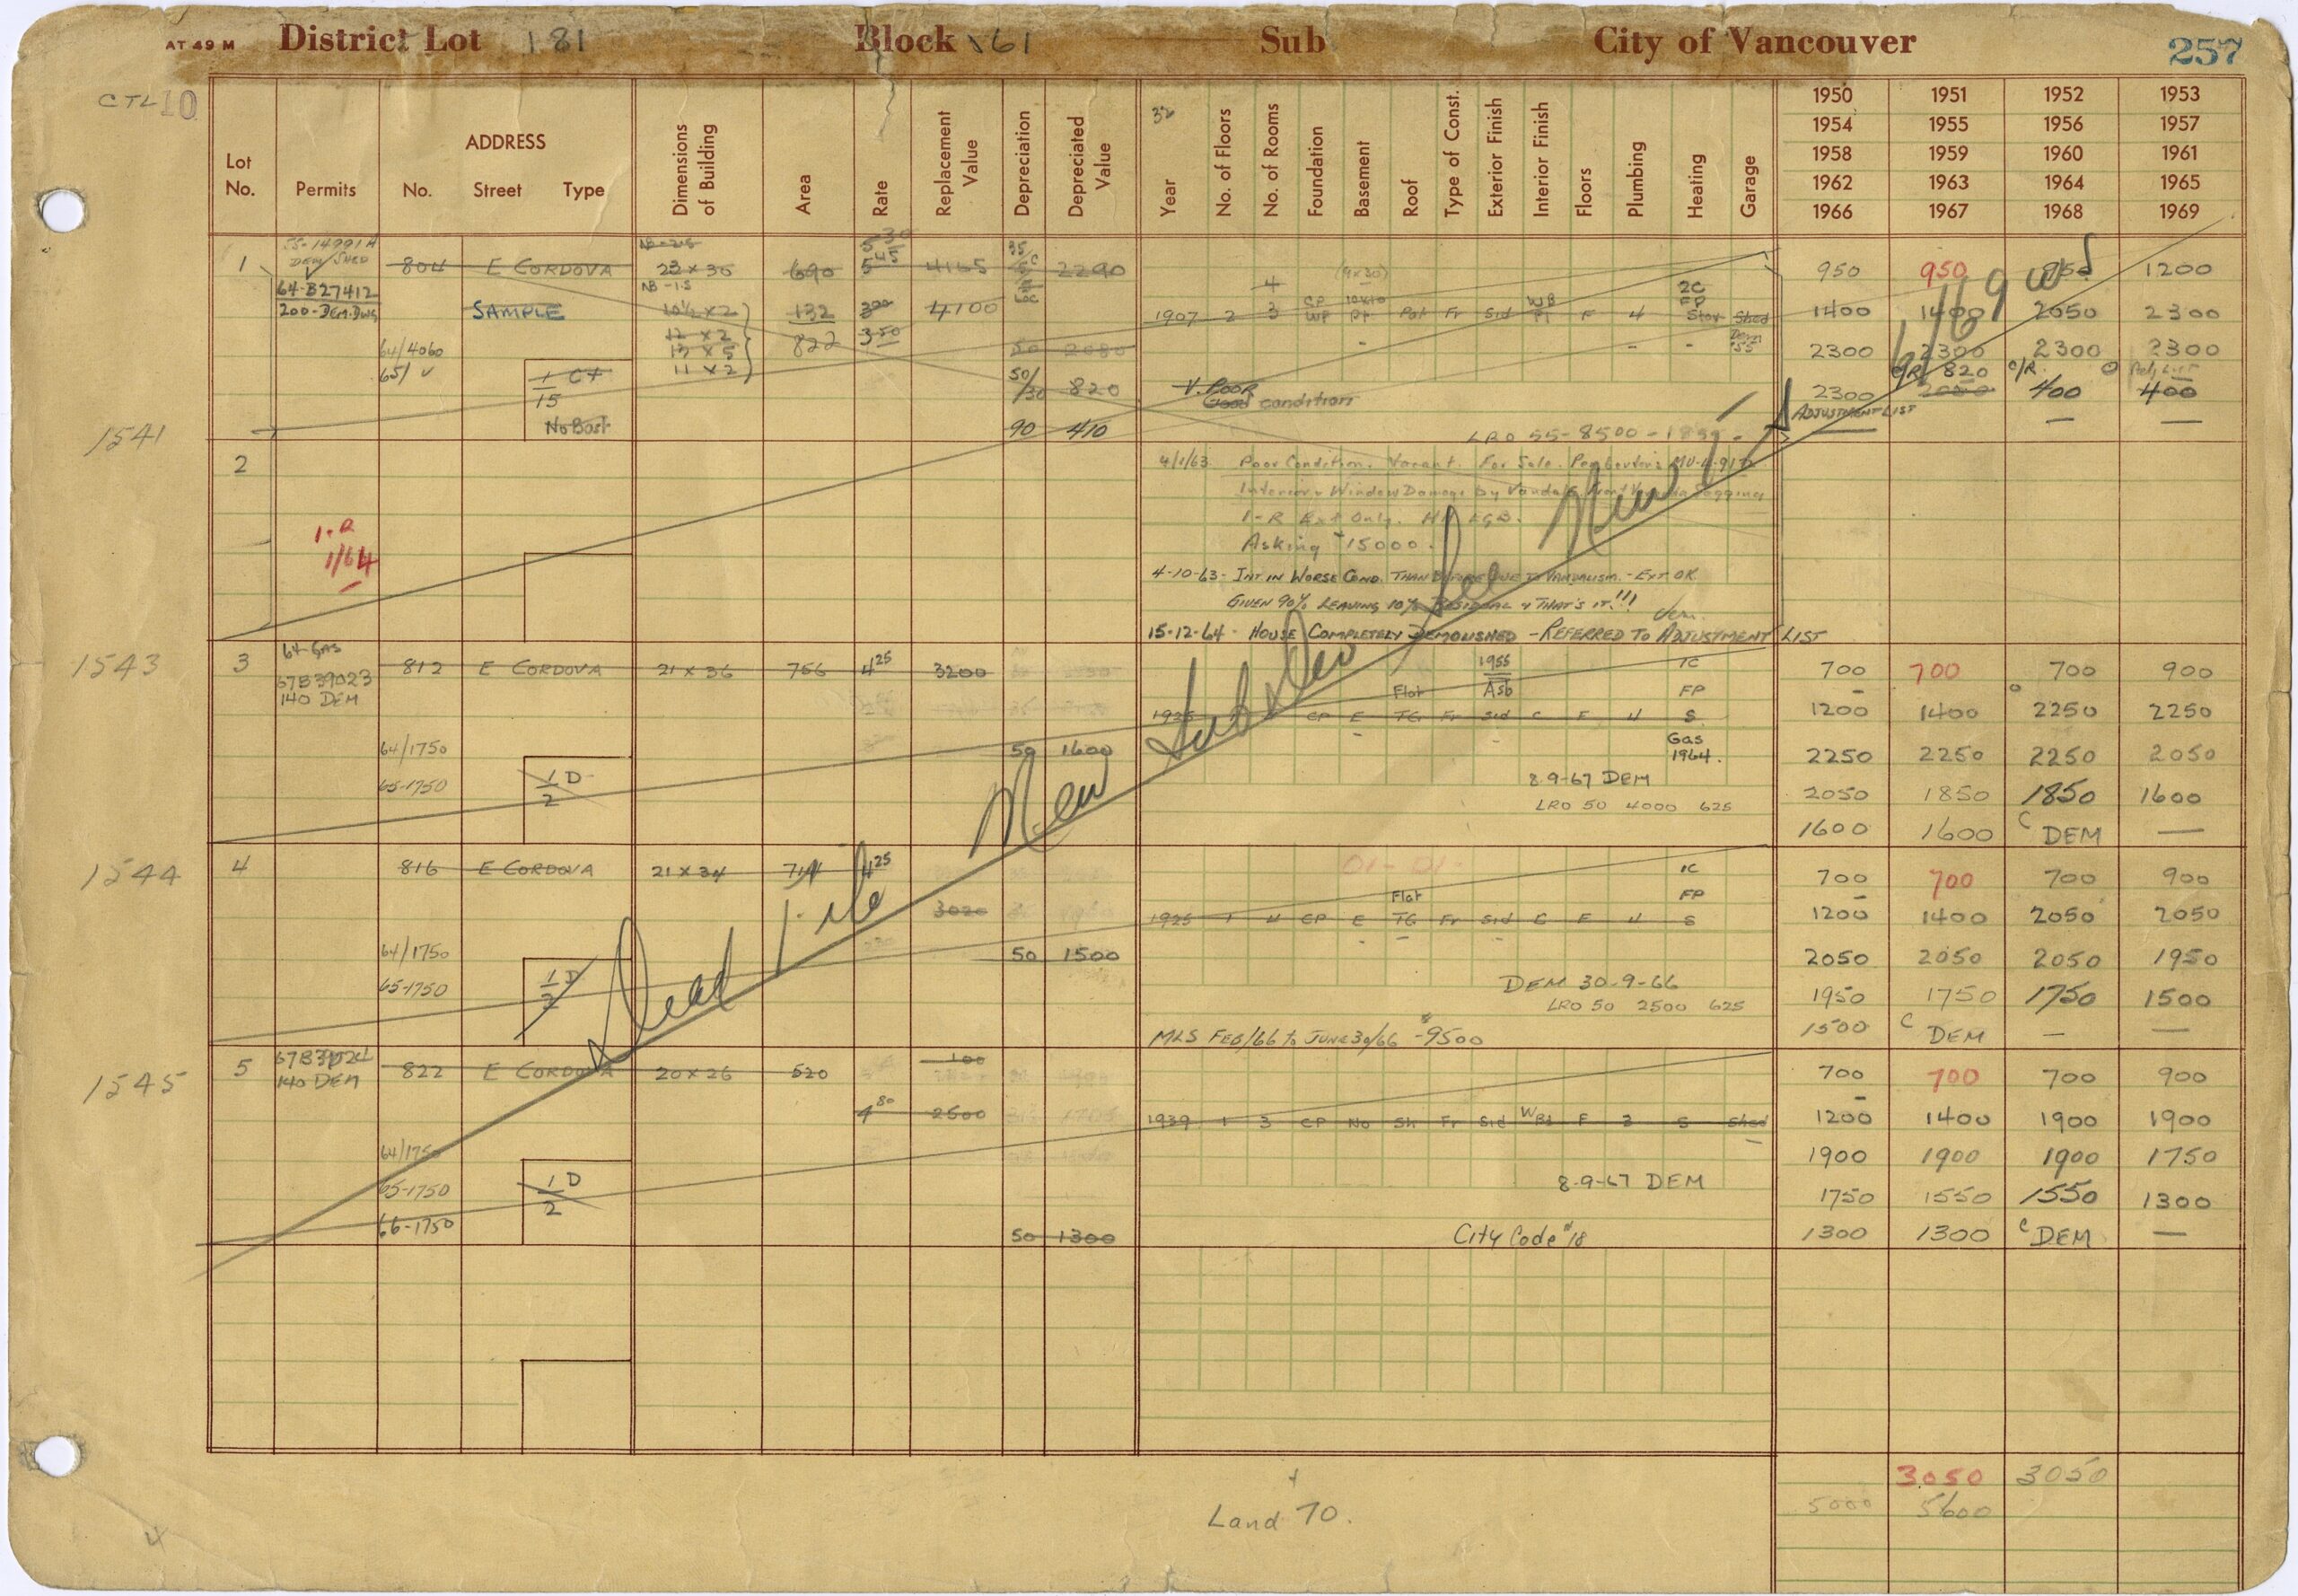 Front of the Property tax appraisal field notes ledger sheet that includes 804 East Cordova Street. The notation ‘Sample’ can be seen beneath the address. Reference code: COV-S283--